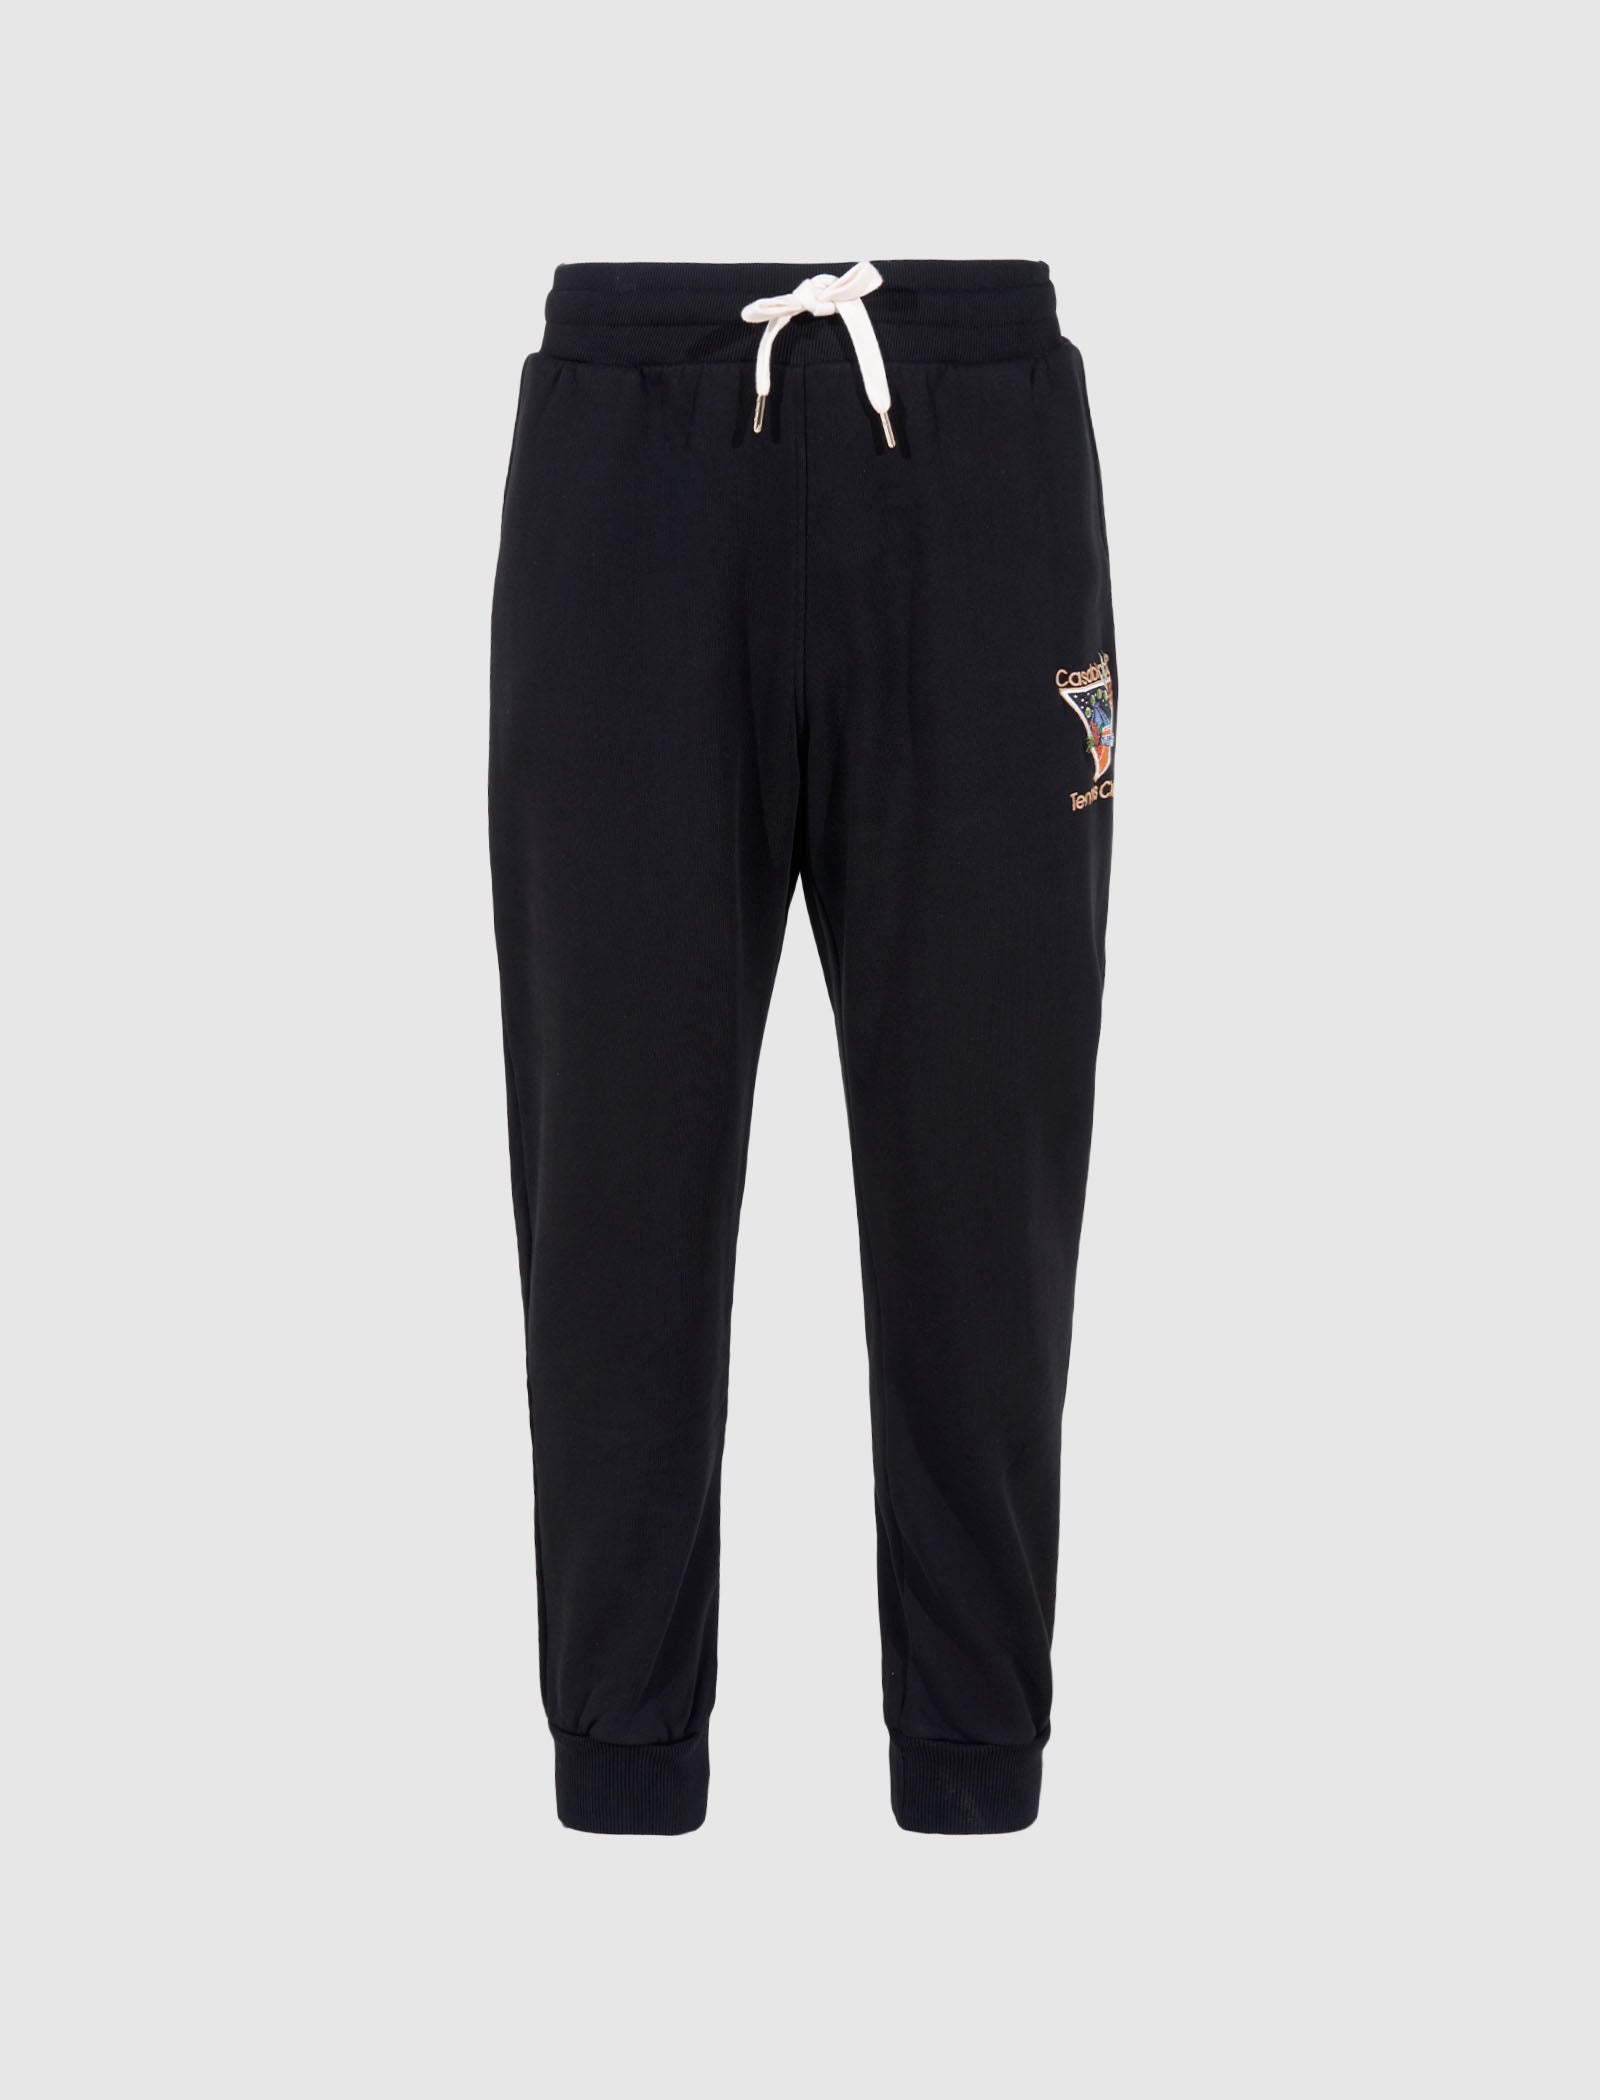 TENNIS CLUB EMBROIDERED SWEATPANT